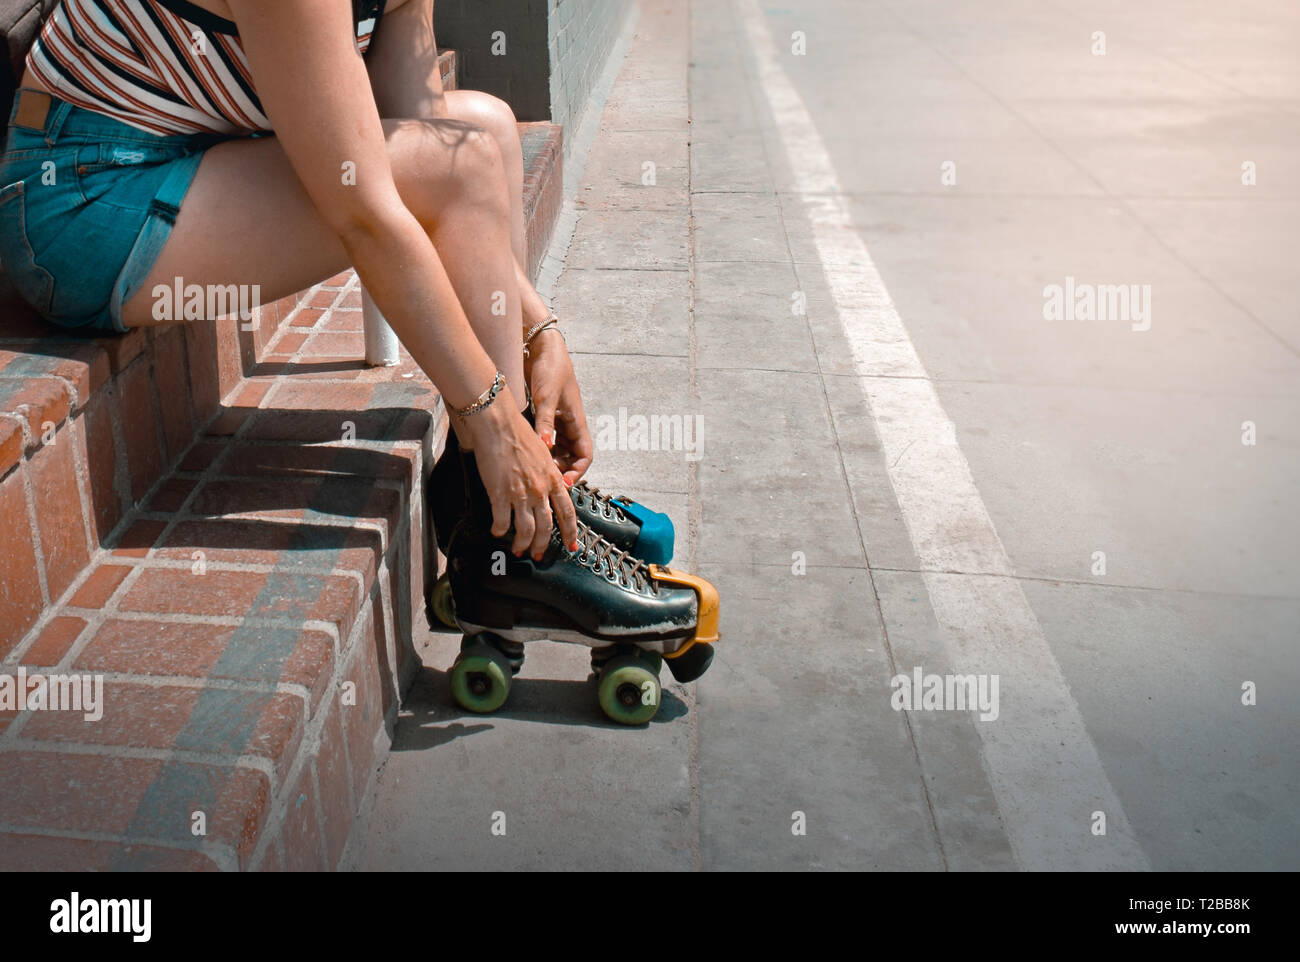 Girl seated at stairs tying roller skates at Venice Beach, Los Angeles, California, USA. Summer trendy lifestyle. Roller skate rent. Stock Photo